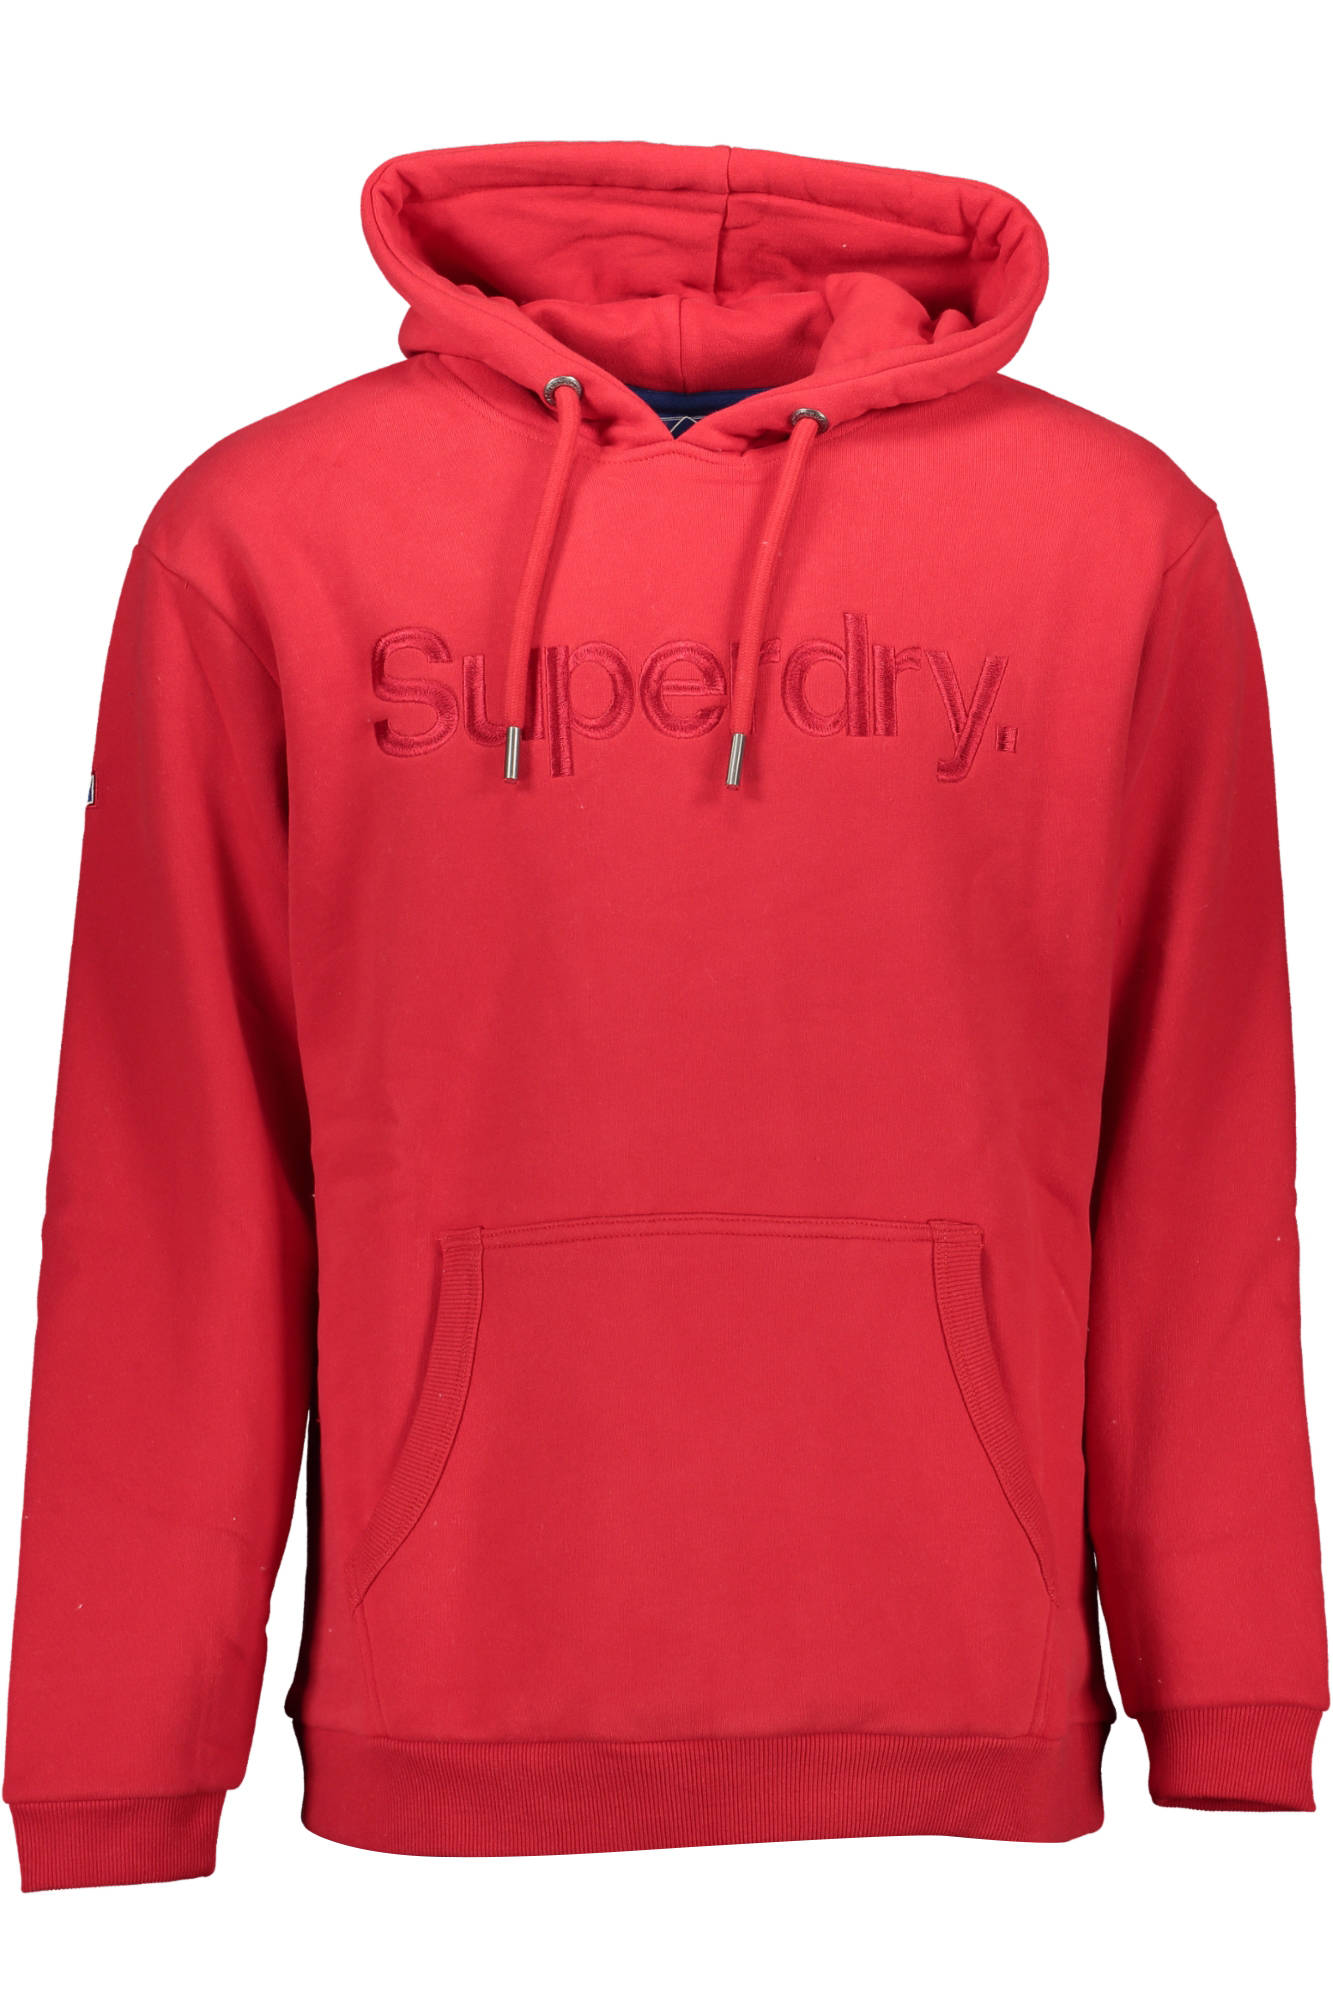 Mikina SUPERDRY mikina ROSSO